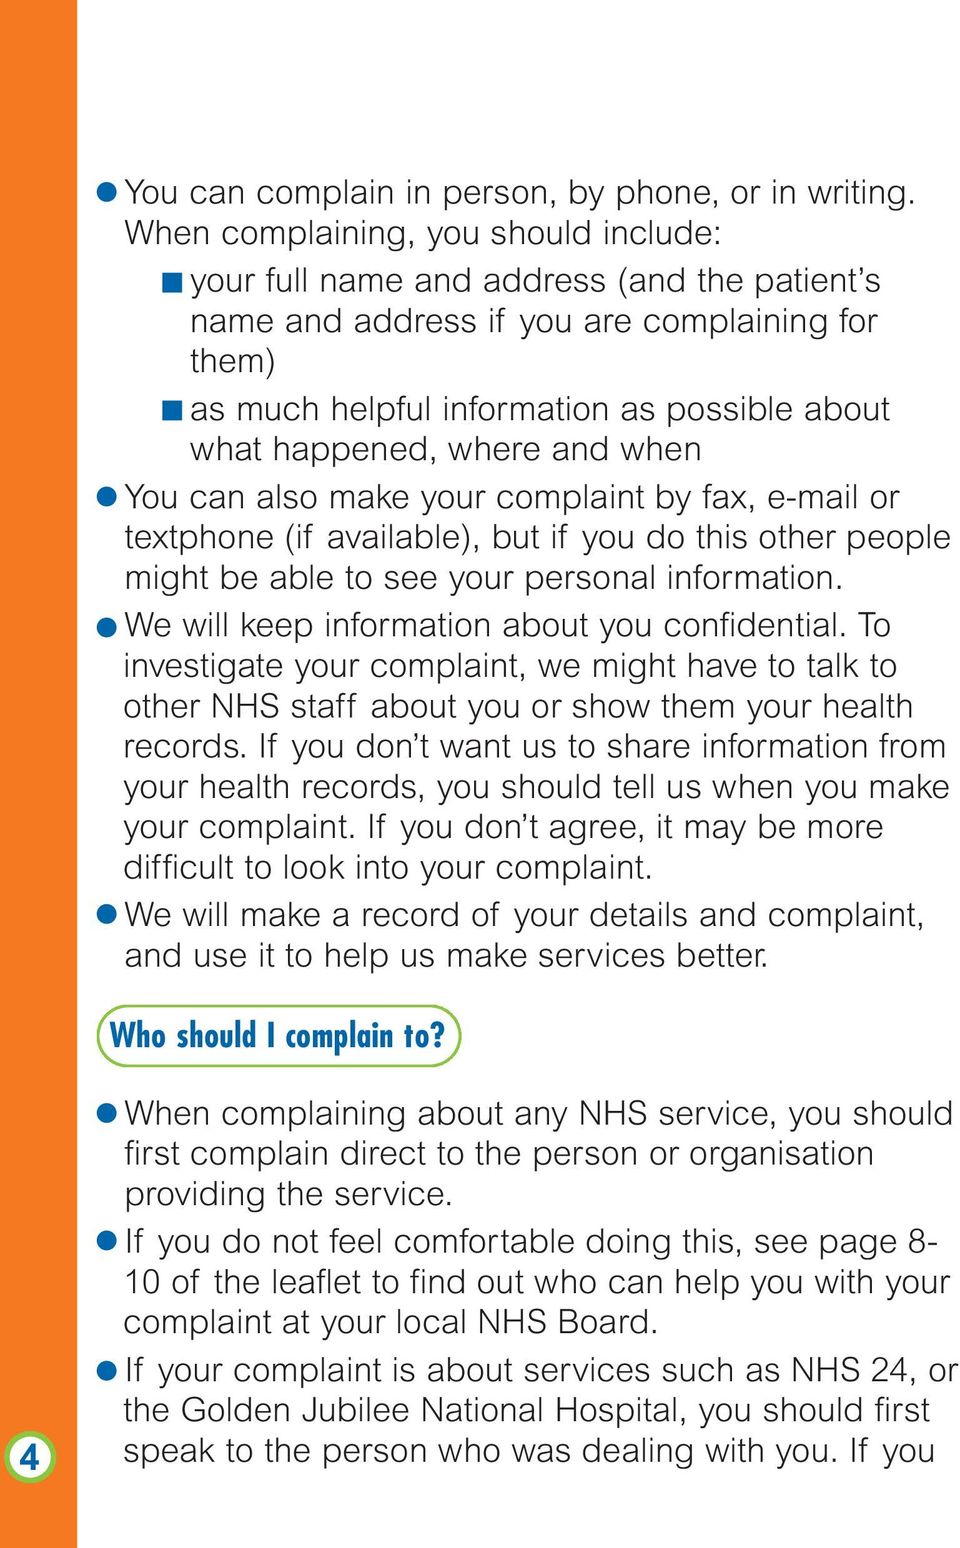 where and when You can also make your complaint by fax, e-mail or textphone (if available), but if you do this other people might be able to see your personal information.